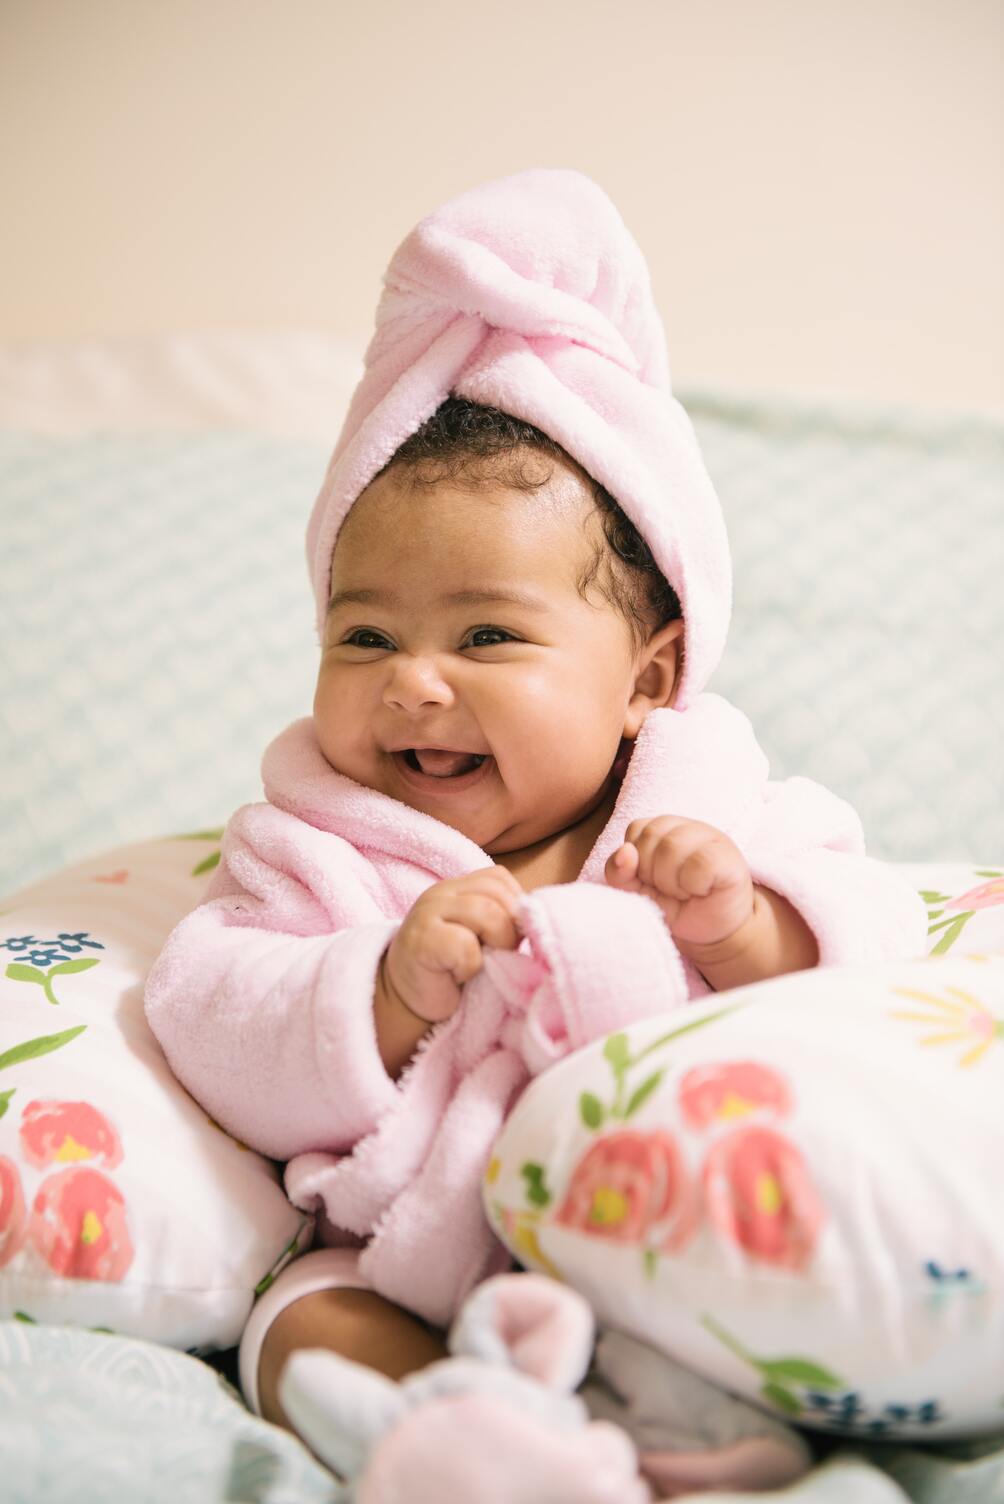 baby in bath robe laughing